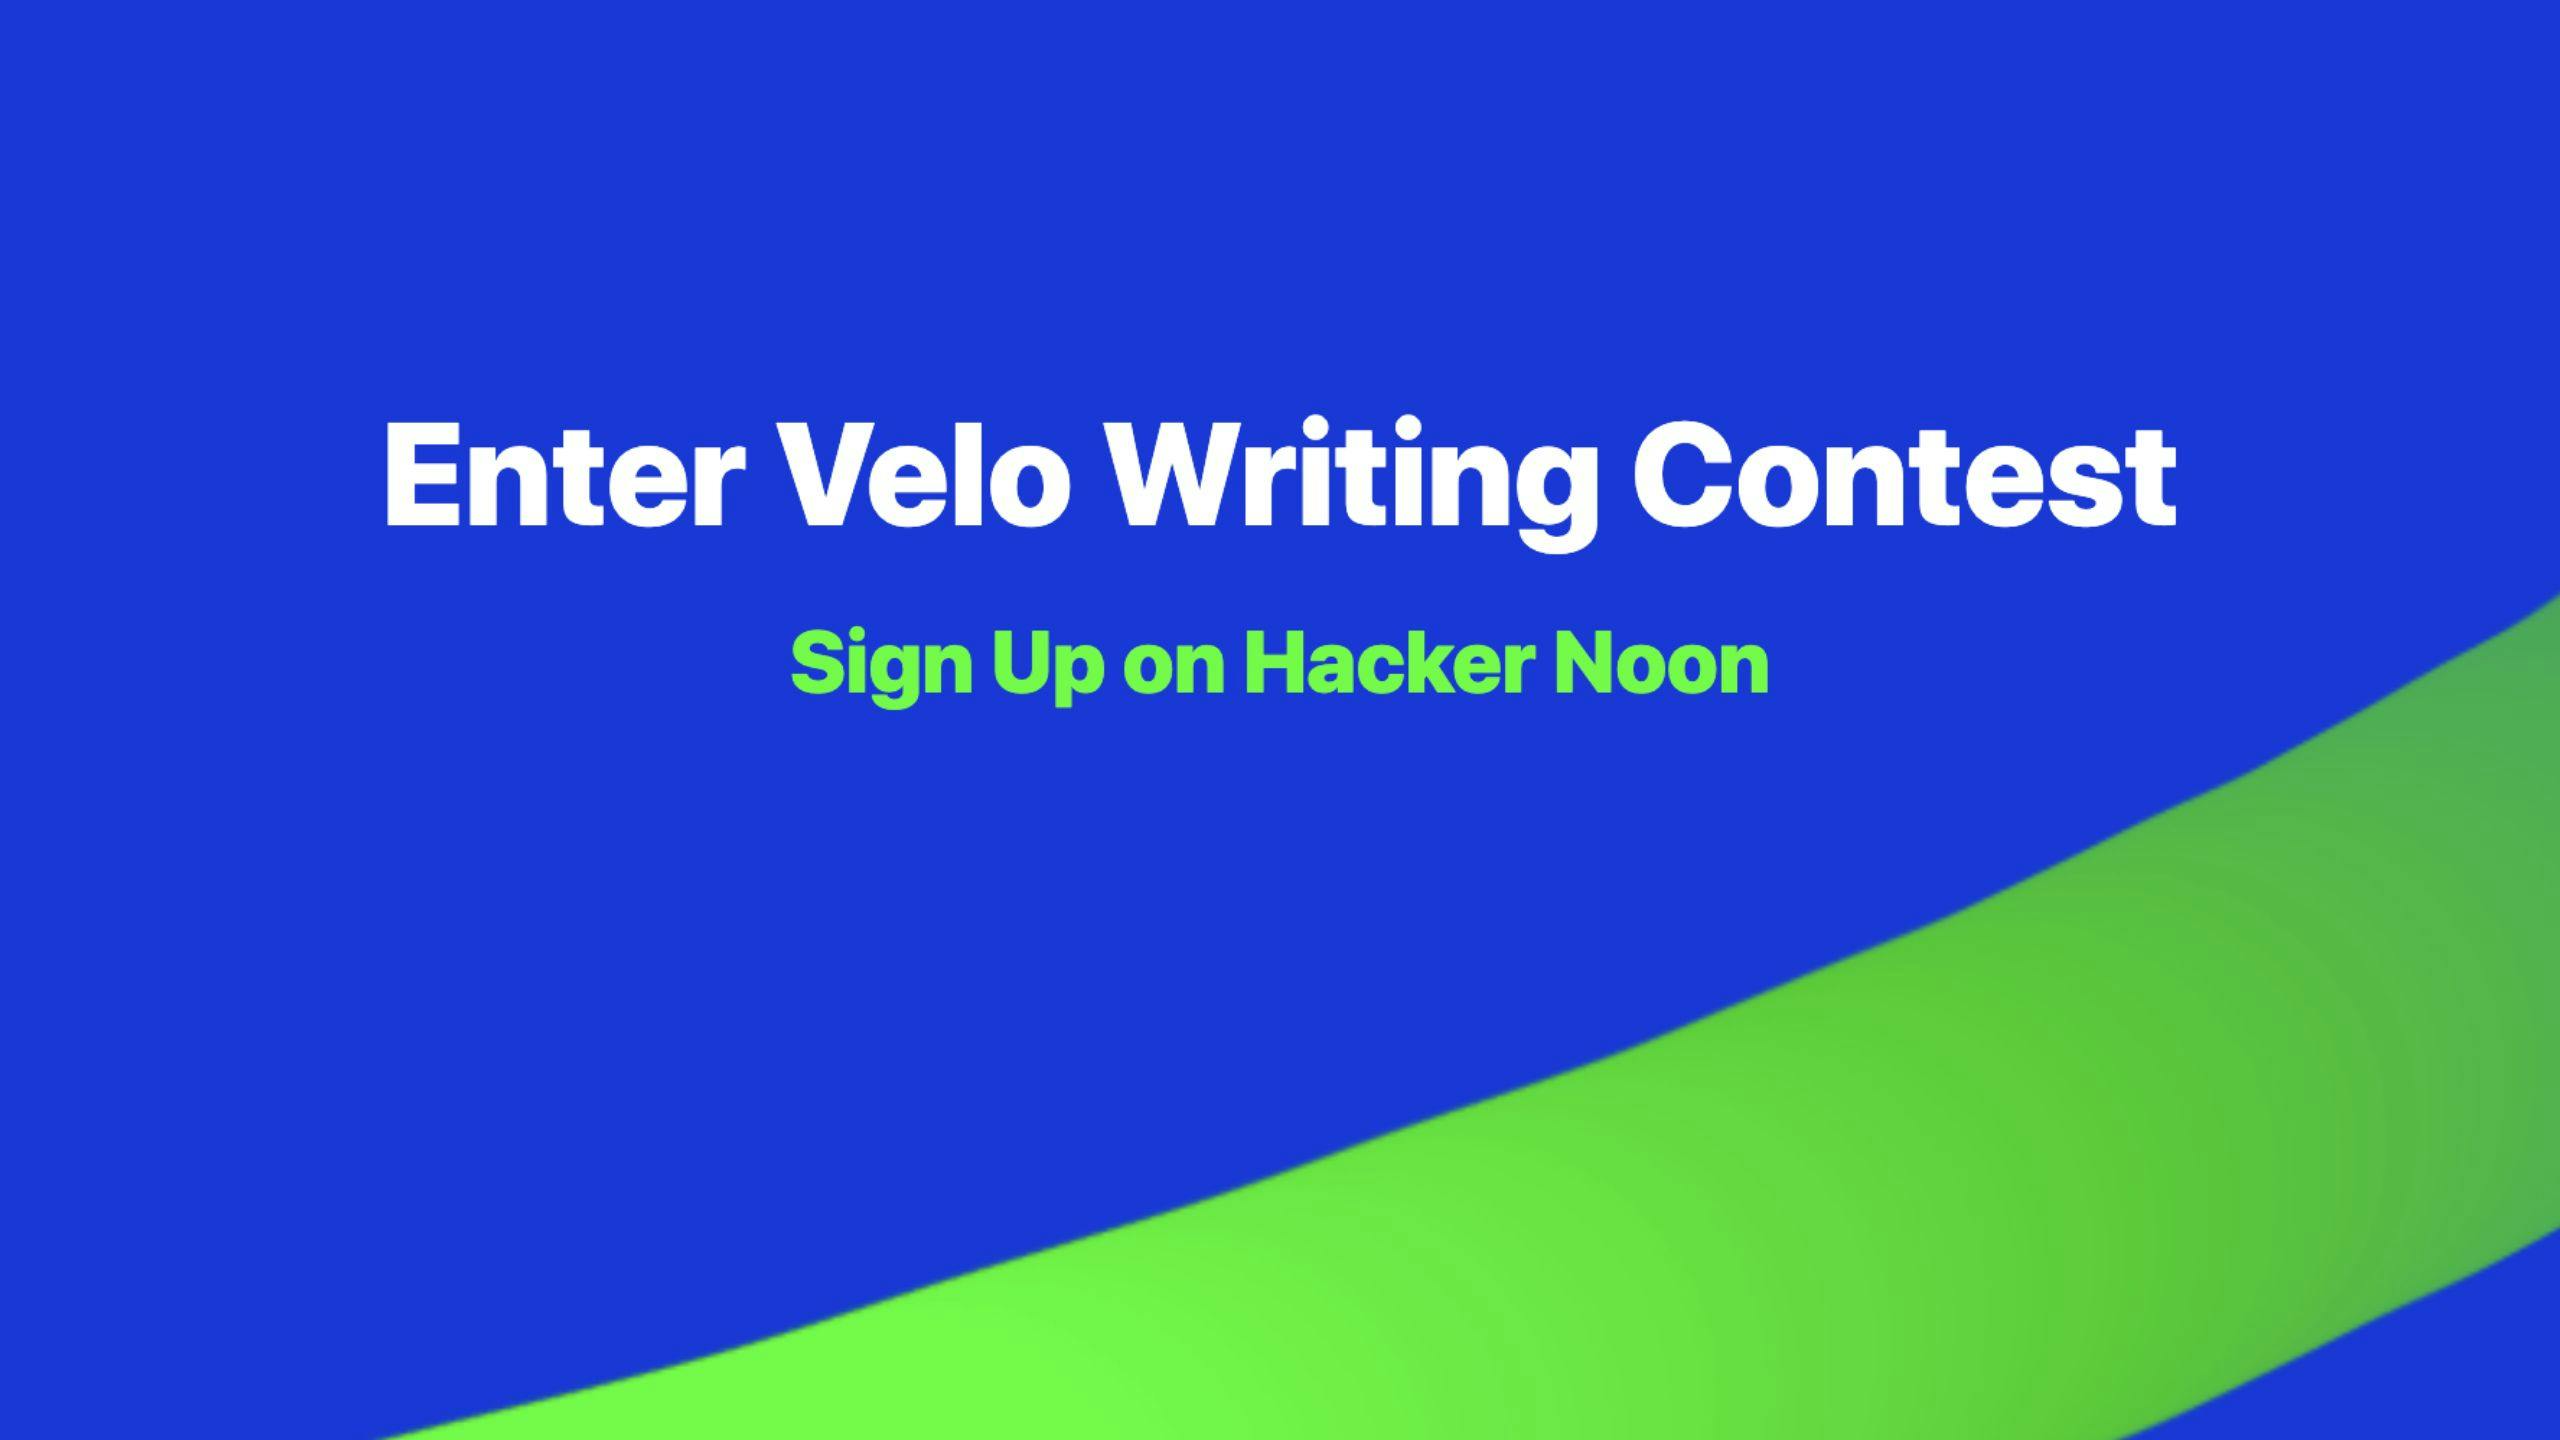 featured image - How to Enter The Velo Writing Contest by Wix & Hacker Noon